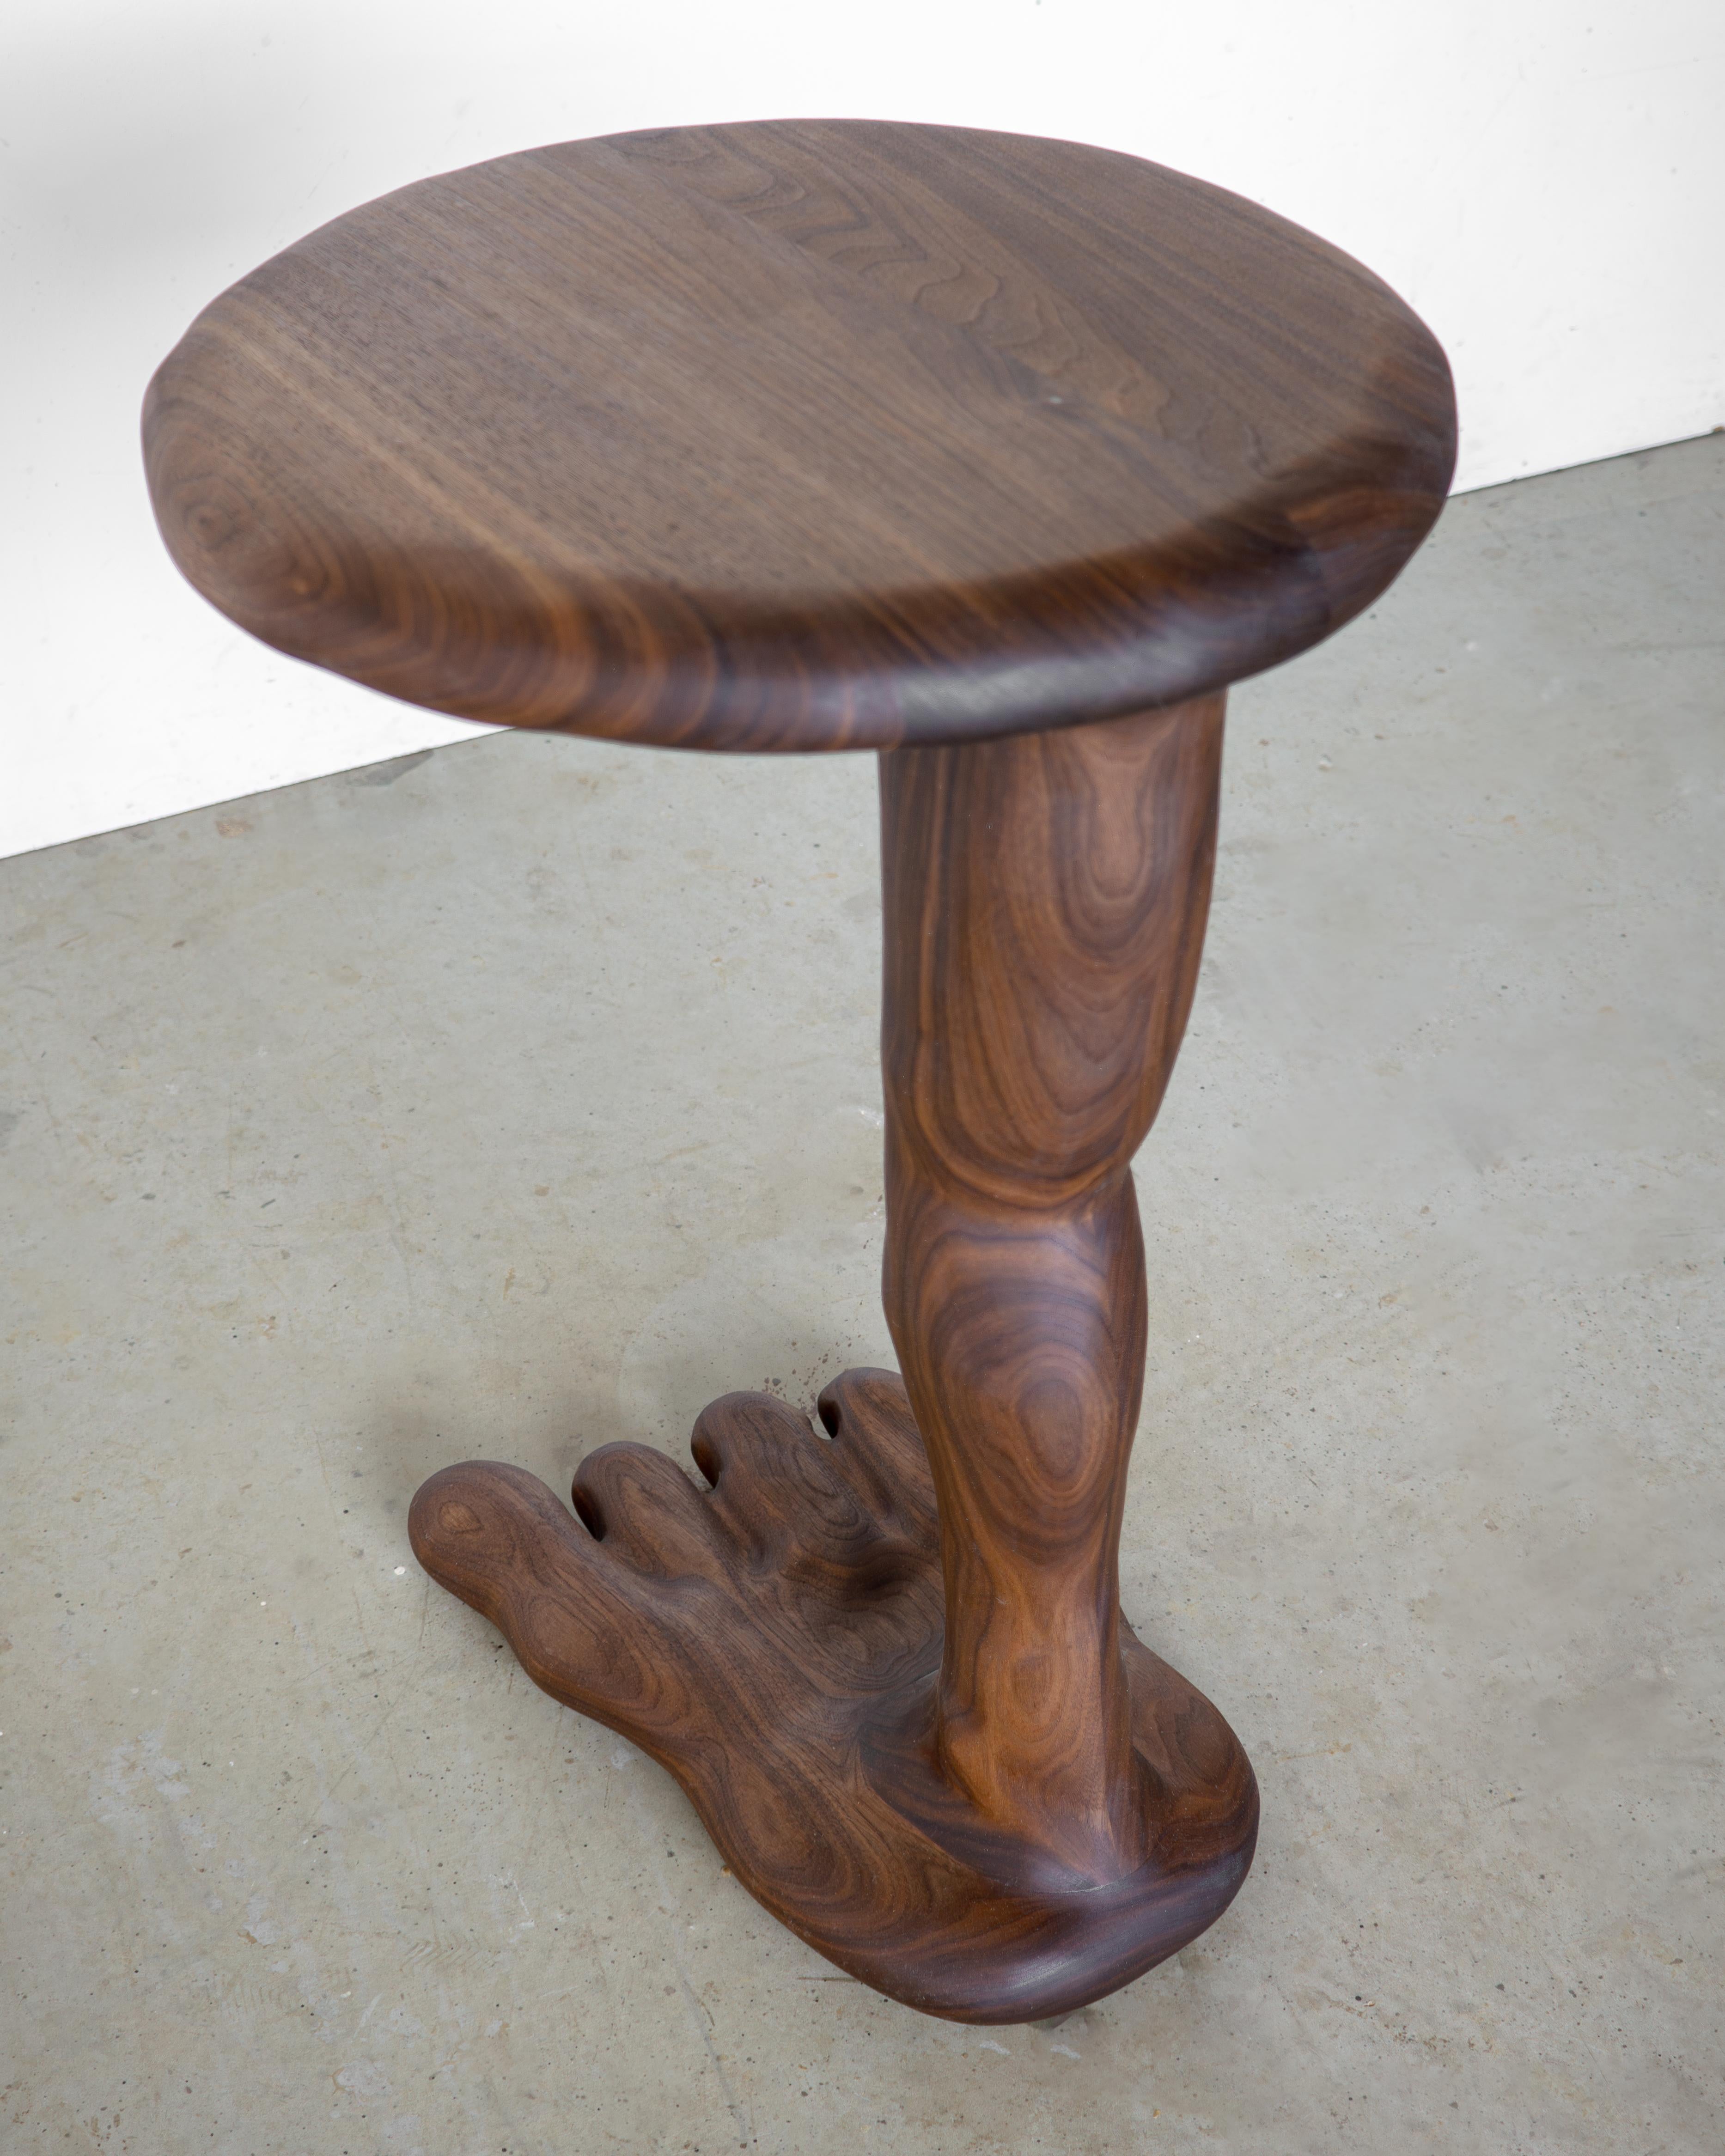 The Leg Side Table - Sculptural Table in Walnut Wood In New Condition For Sale In Aach, DE